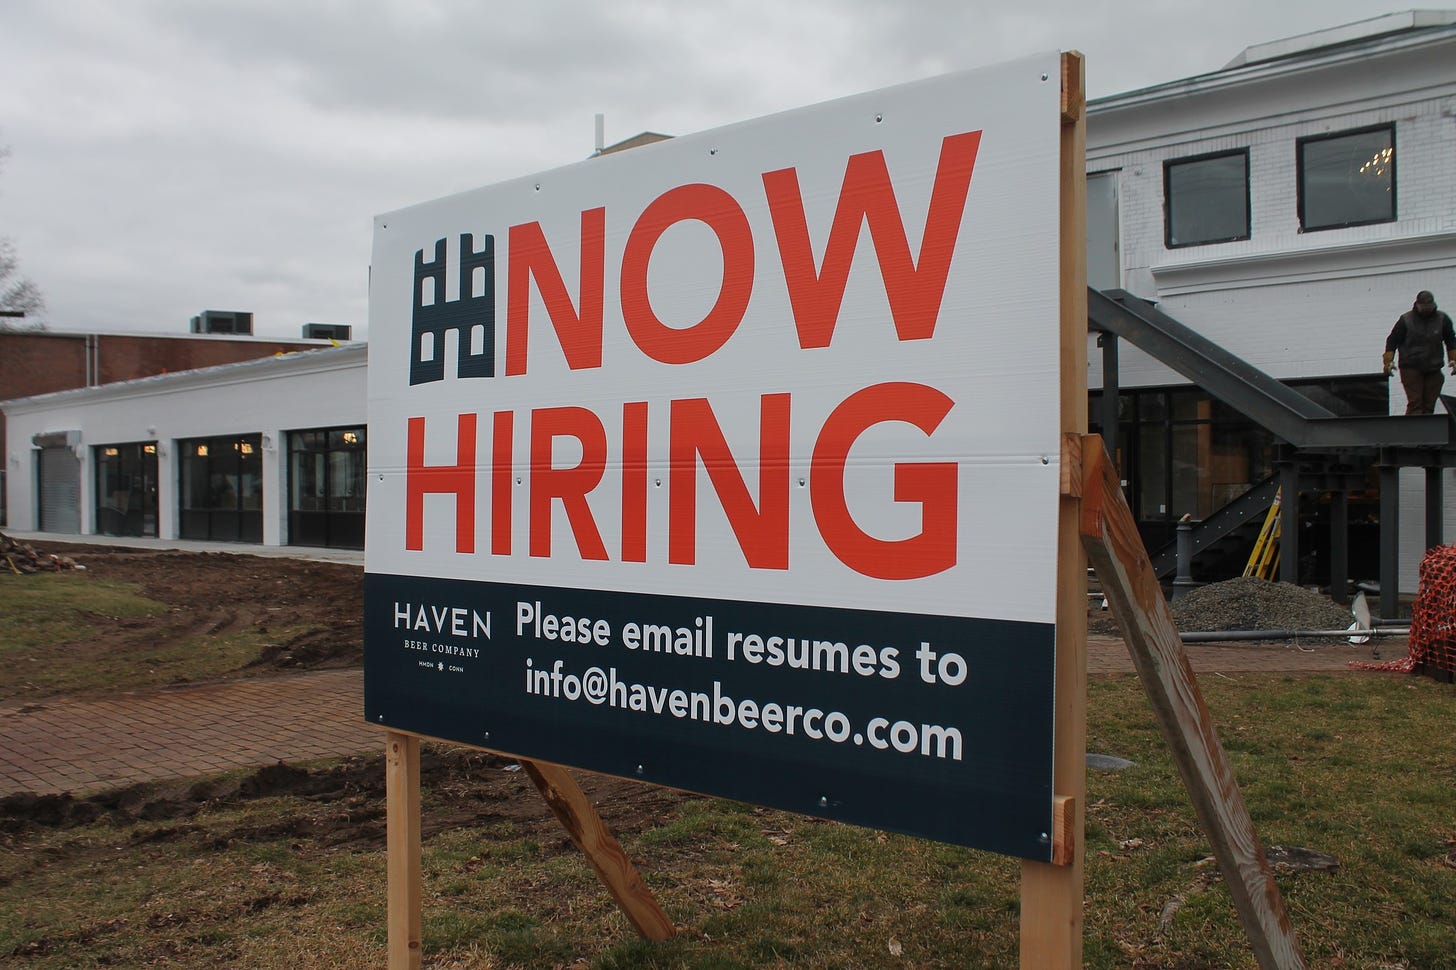 May be an image of 1 person and text that says 'HNOW HIRING HAVEN Please email resumes info@havenbeerco.com to to OMPA'